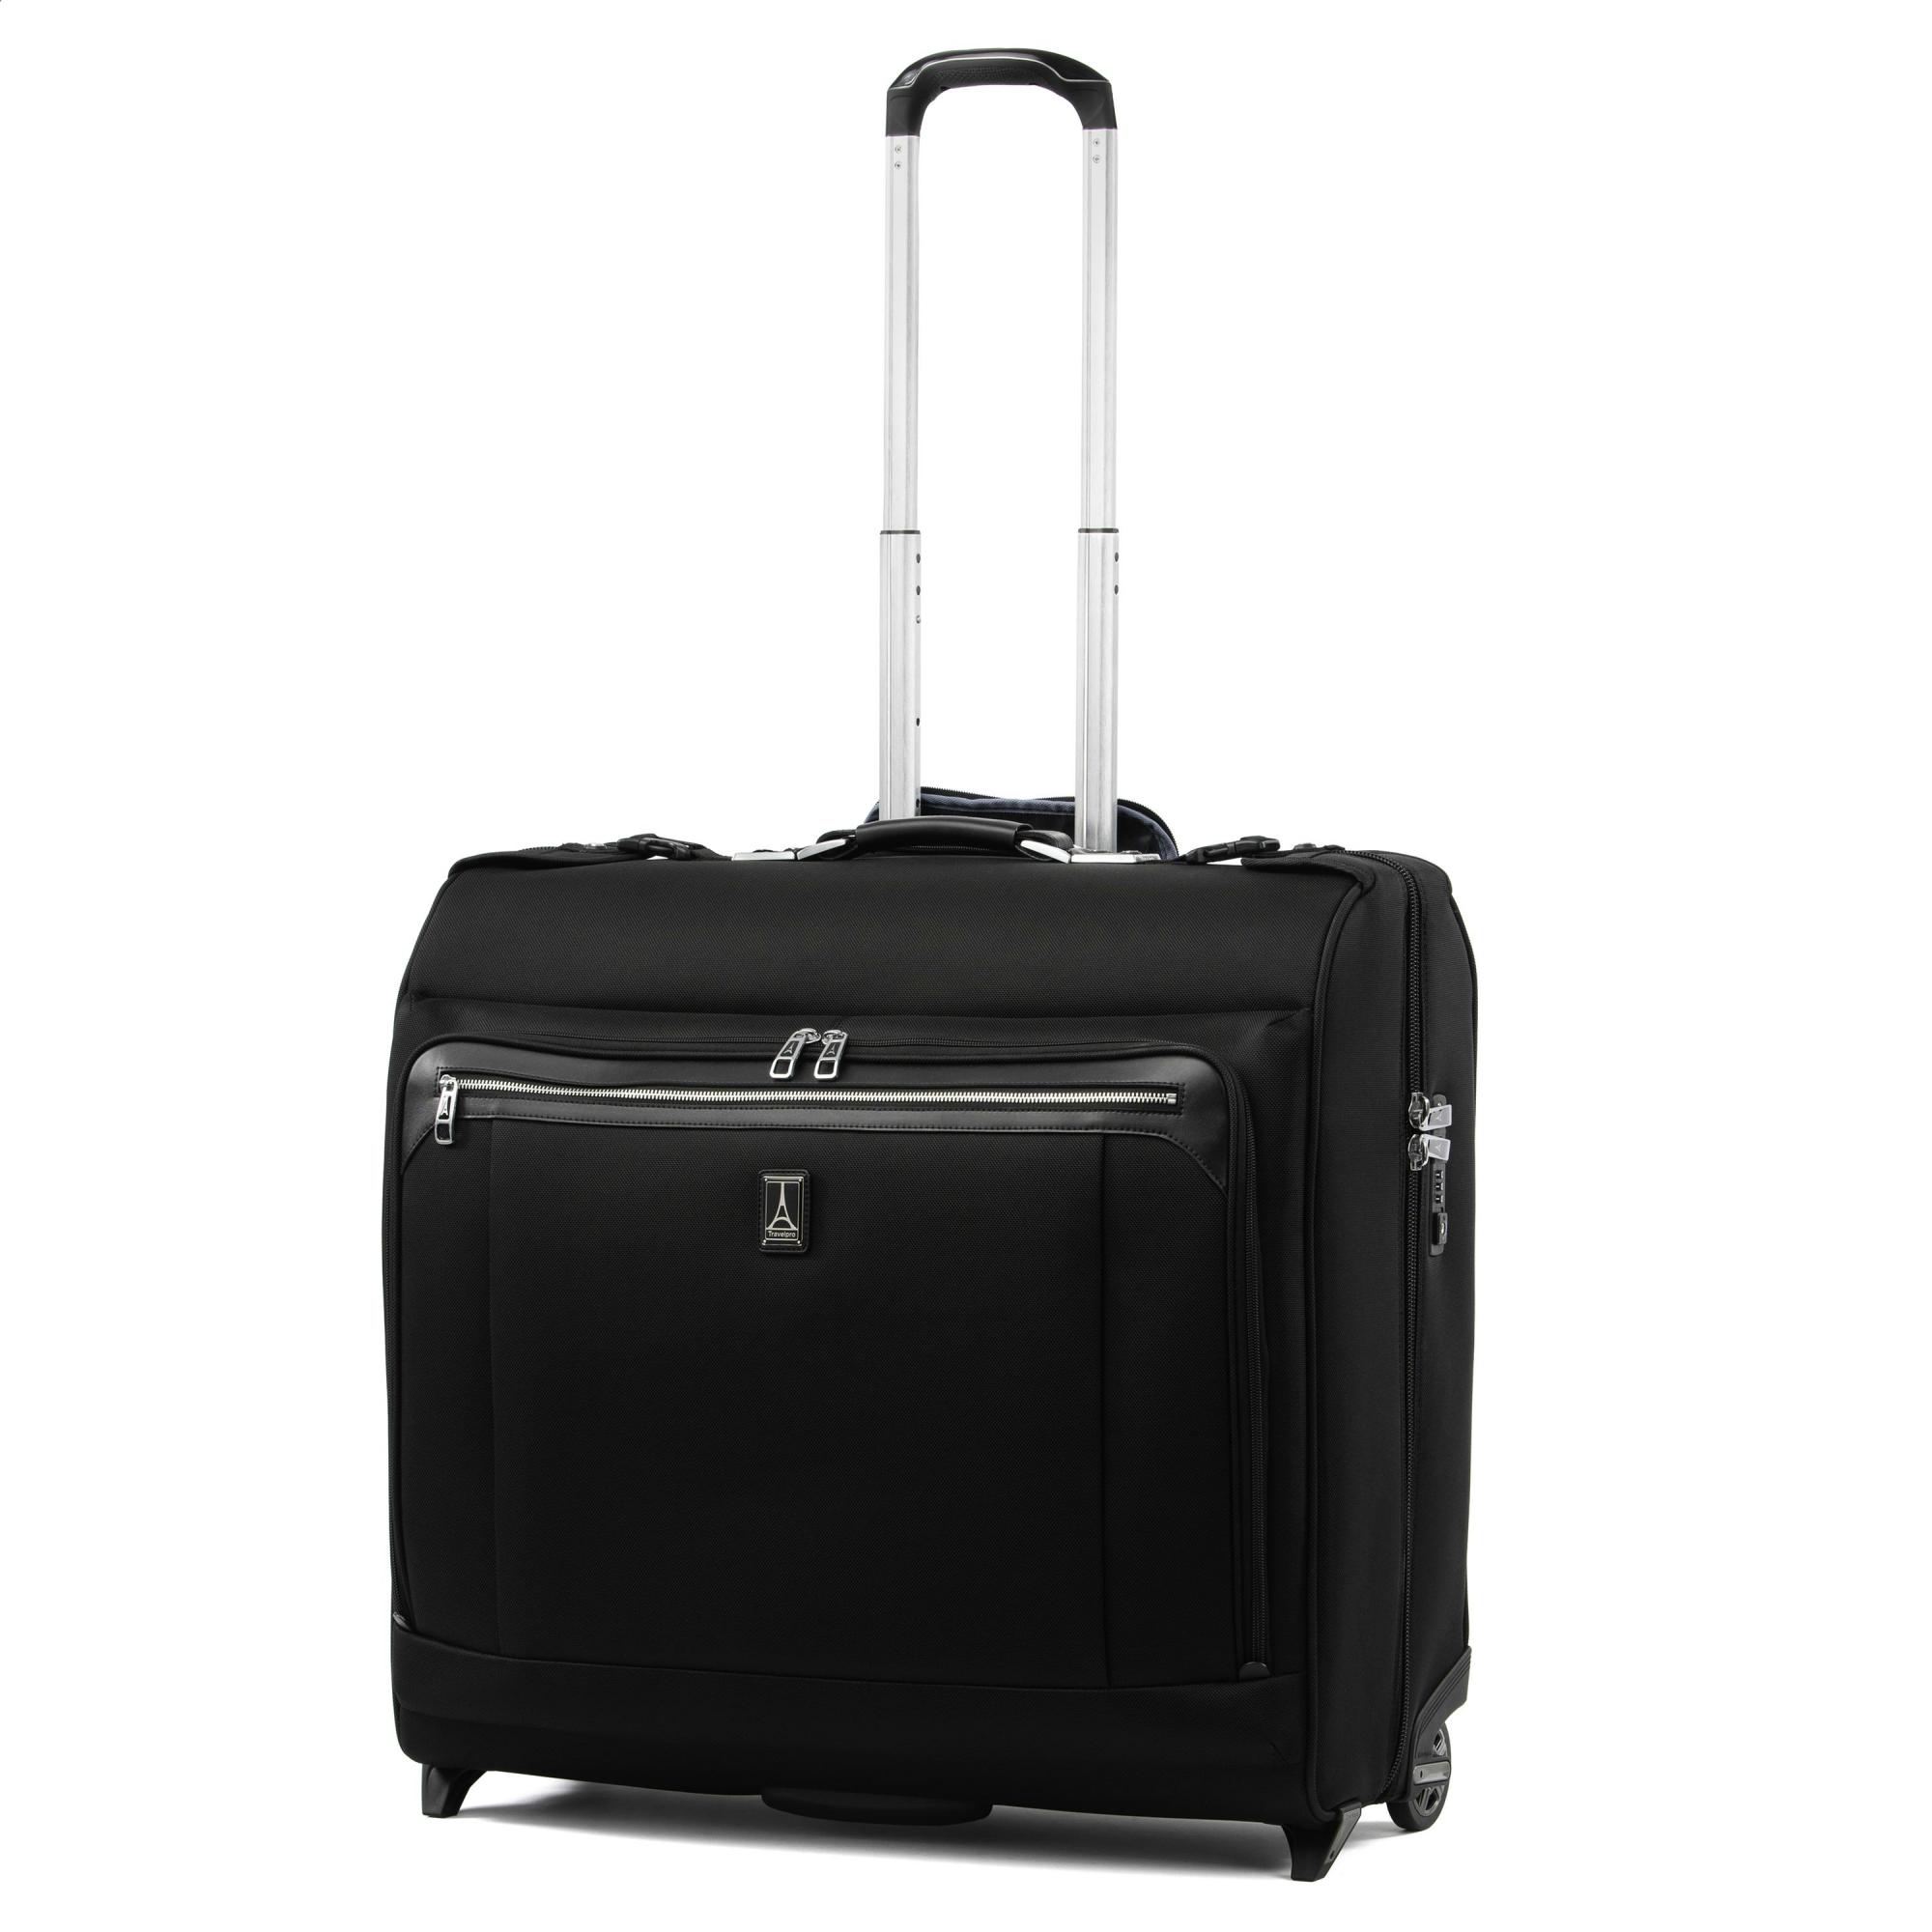 Platinum® Magna™ 2 Carry-on Rolling Garment Bag – Travelpro Luggage Outlet